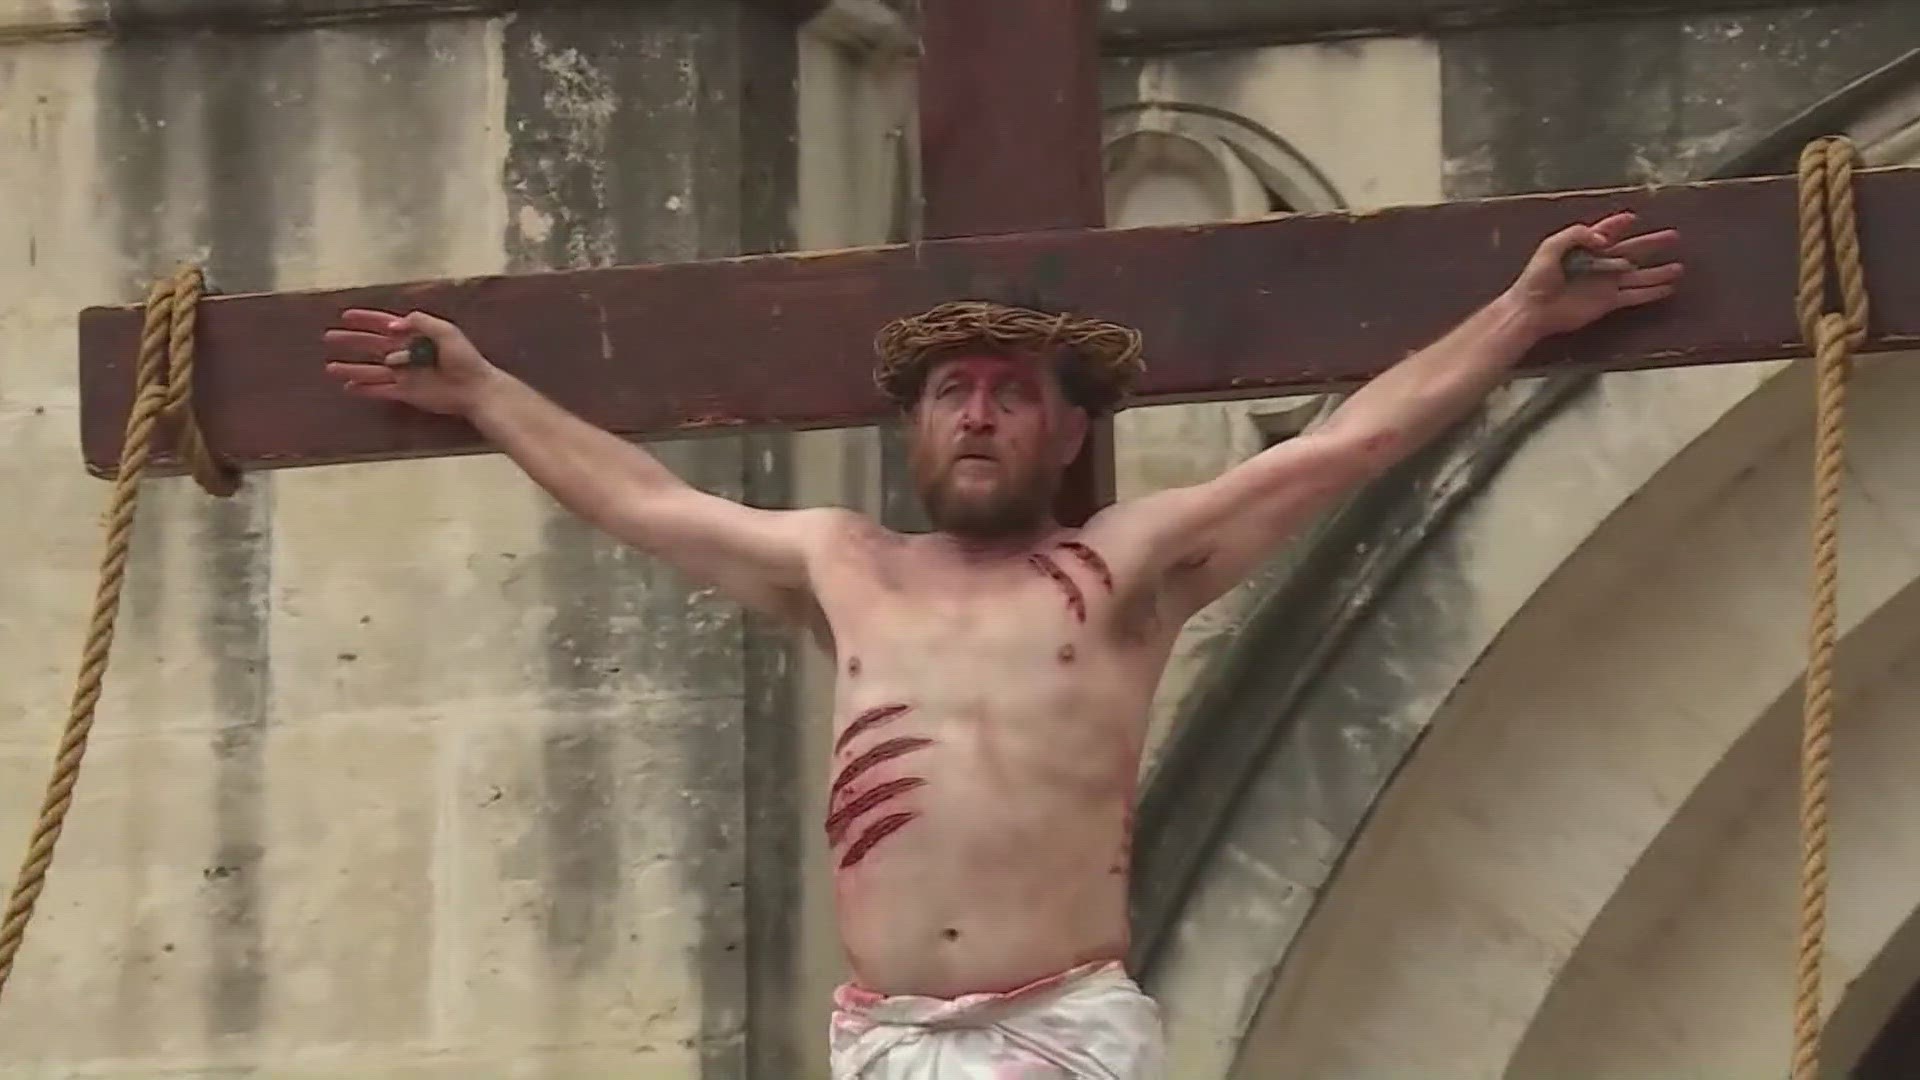 Passion of Christ re-enactment to start at new location this year